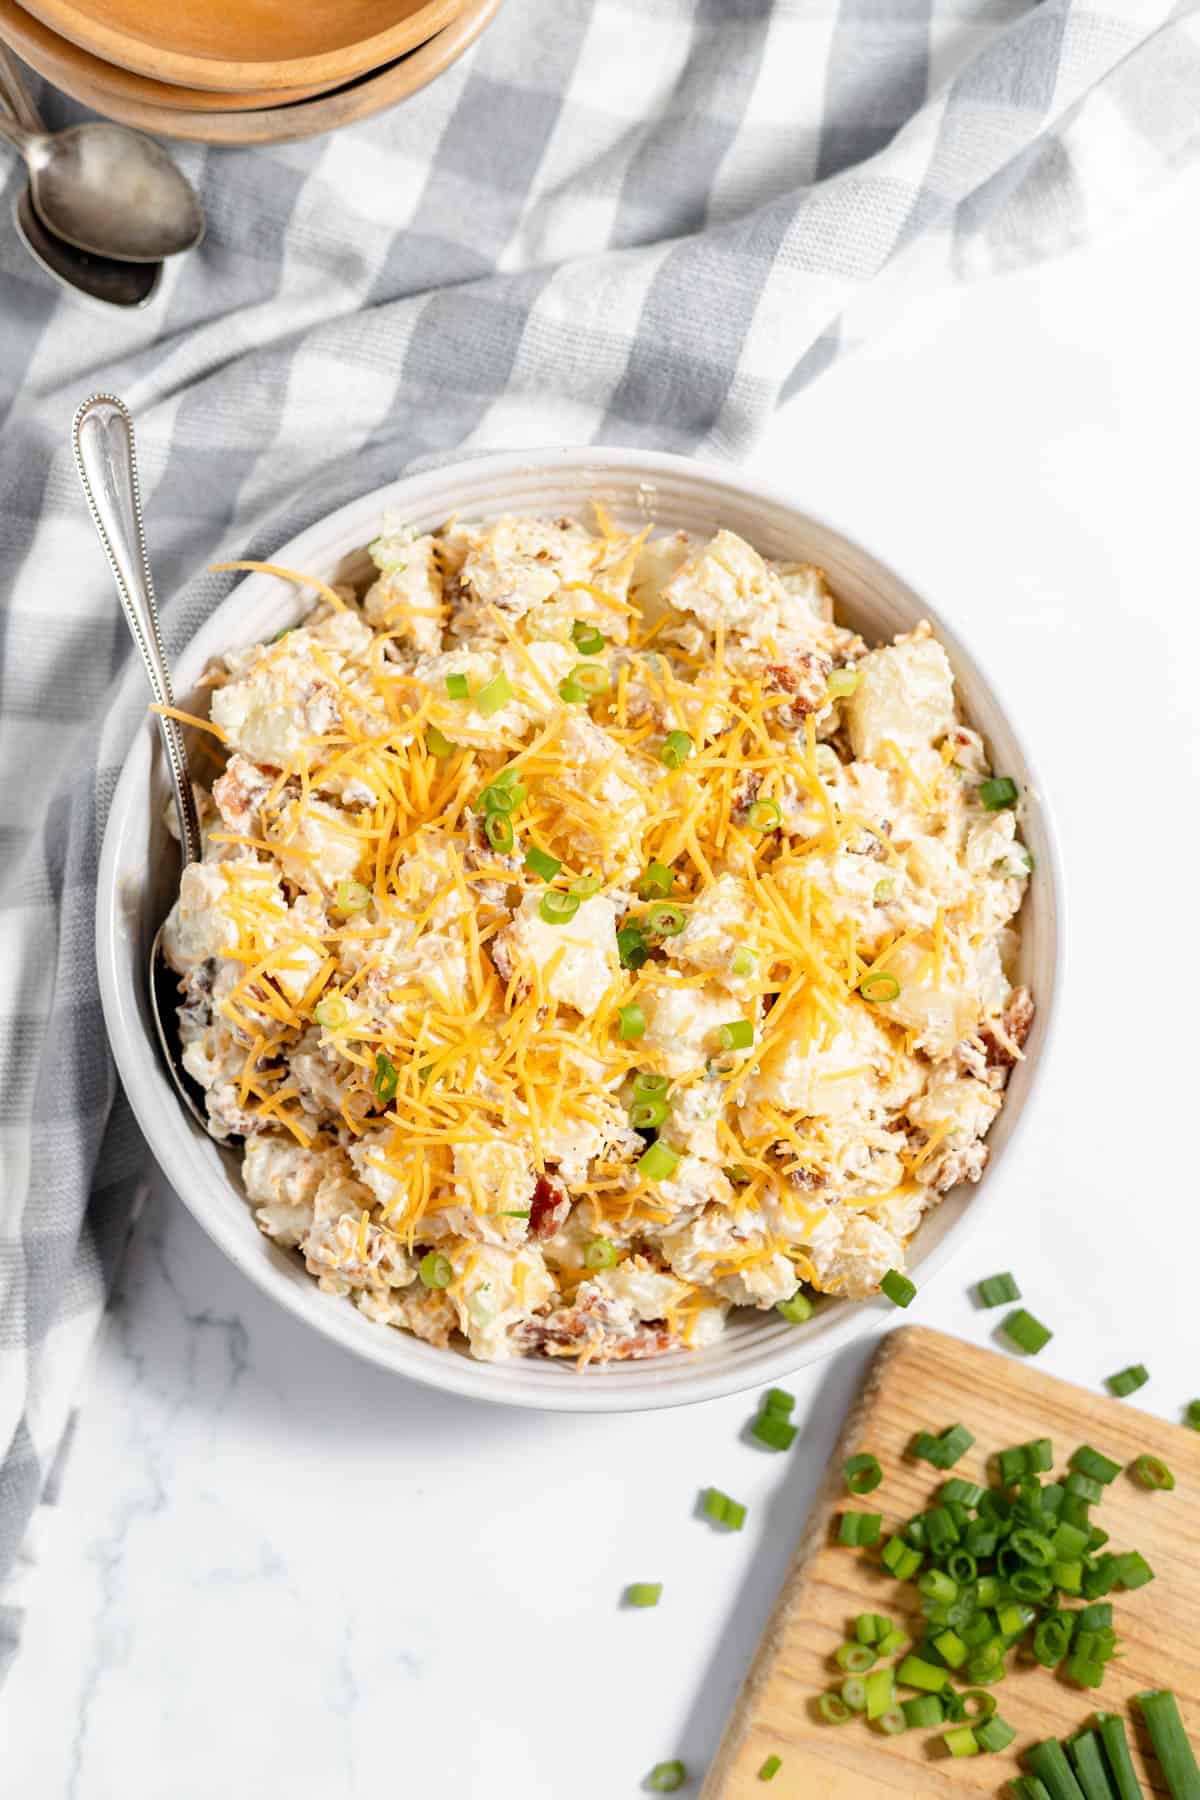 A bowl of loaded baked potato salad with grated cheese sprinkled on top.